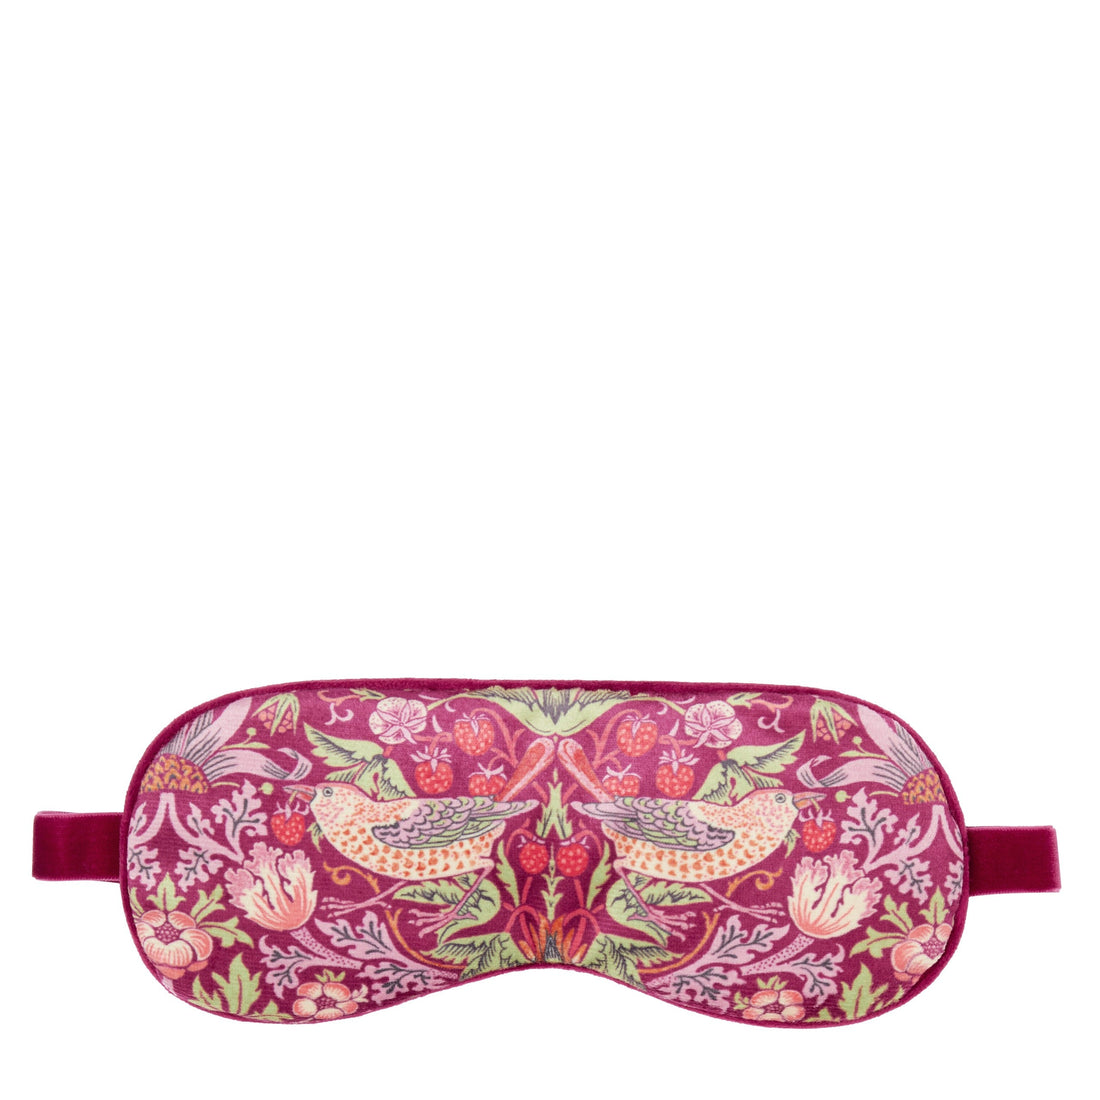 Strawberry Thief Lavender Sleep Mask Contents